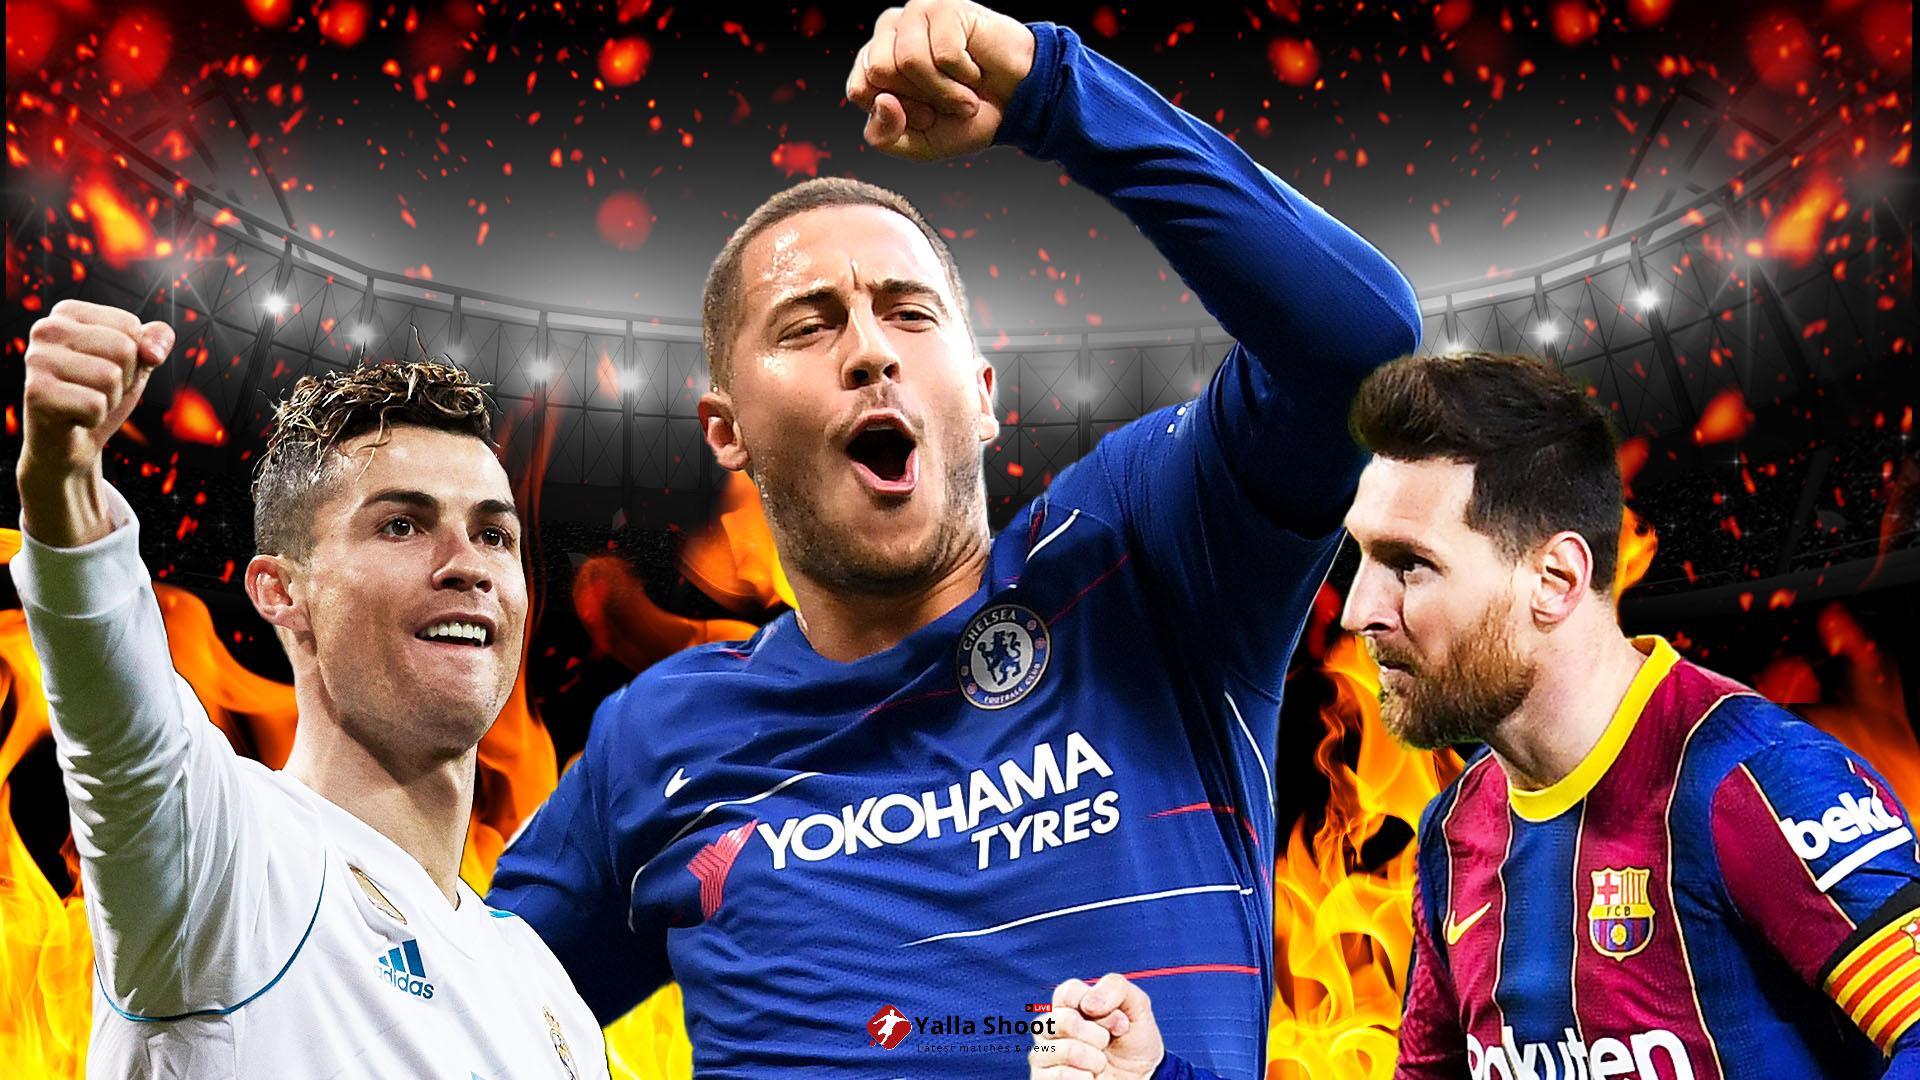 Eden Hazard weighs in on Lionel Messi vs Cristiano Ronaldo debate and claims he was 'better footballer' than one of them